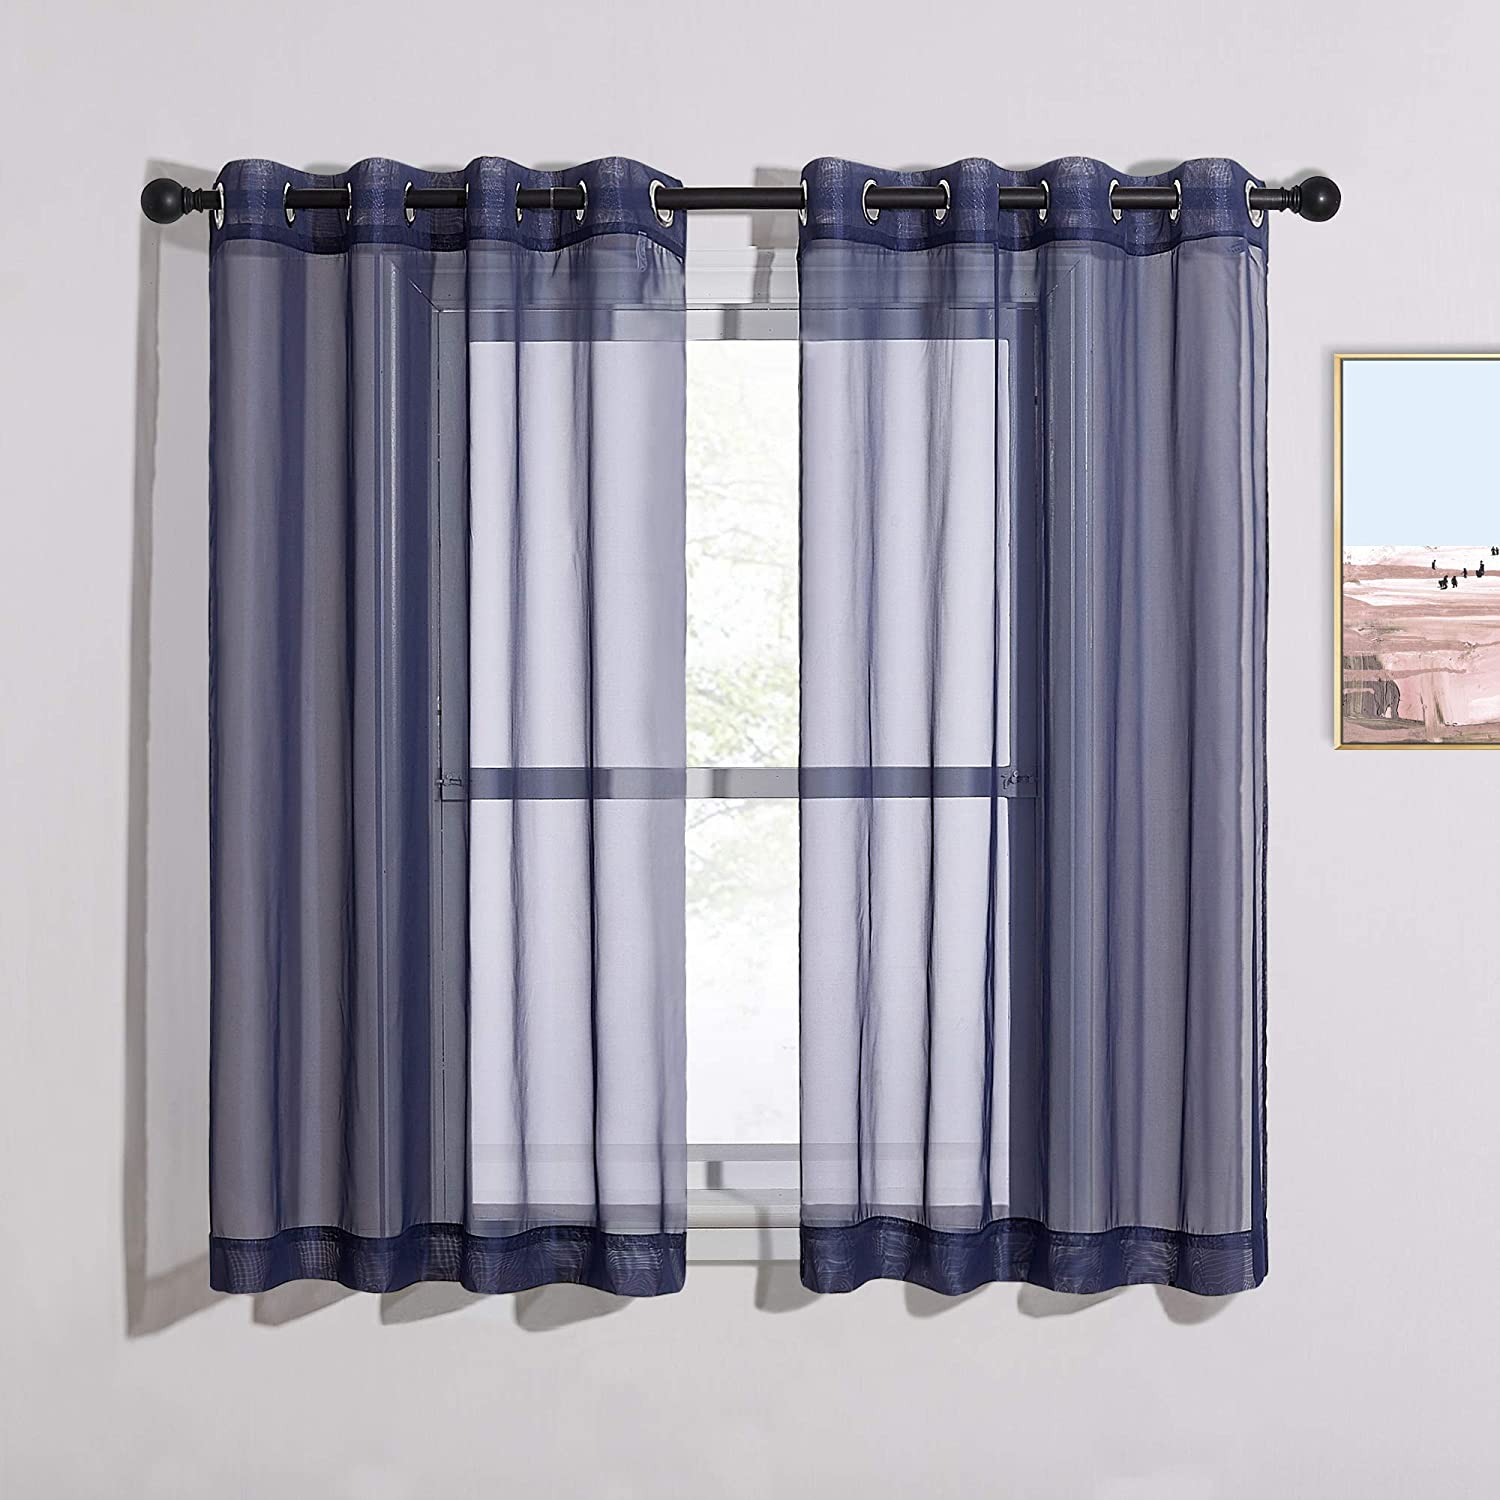 Grommet Sheer Privacy Voile Curtains For Bedroom And Living Room 1 Pair KGORGE Store